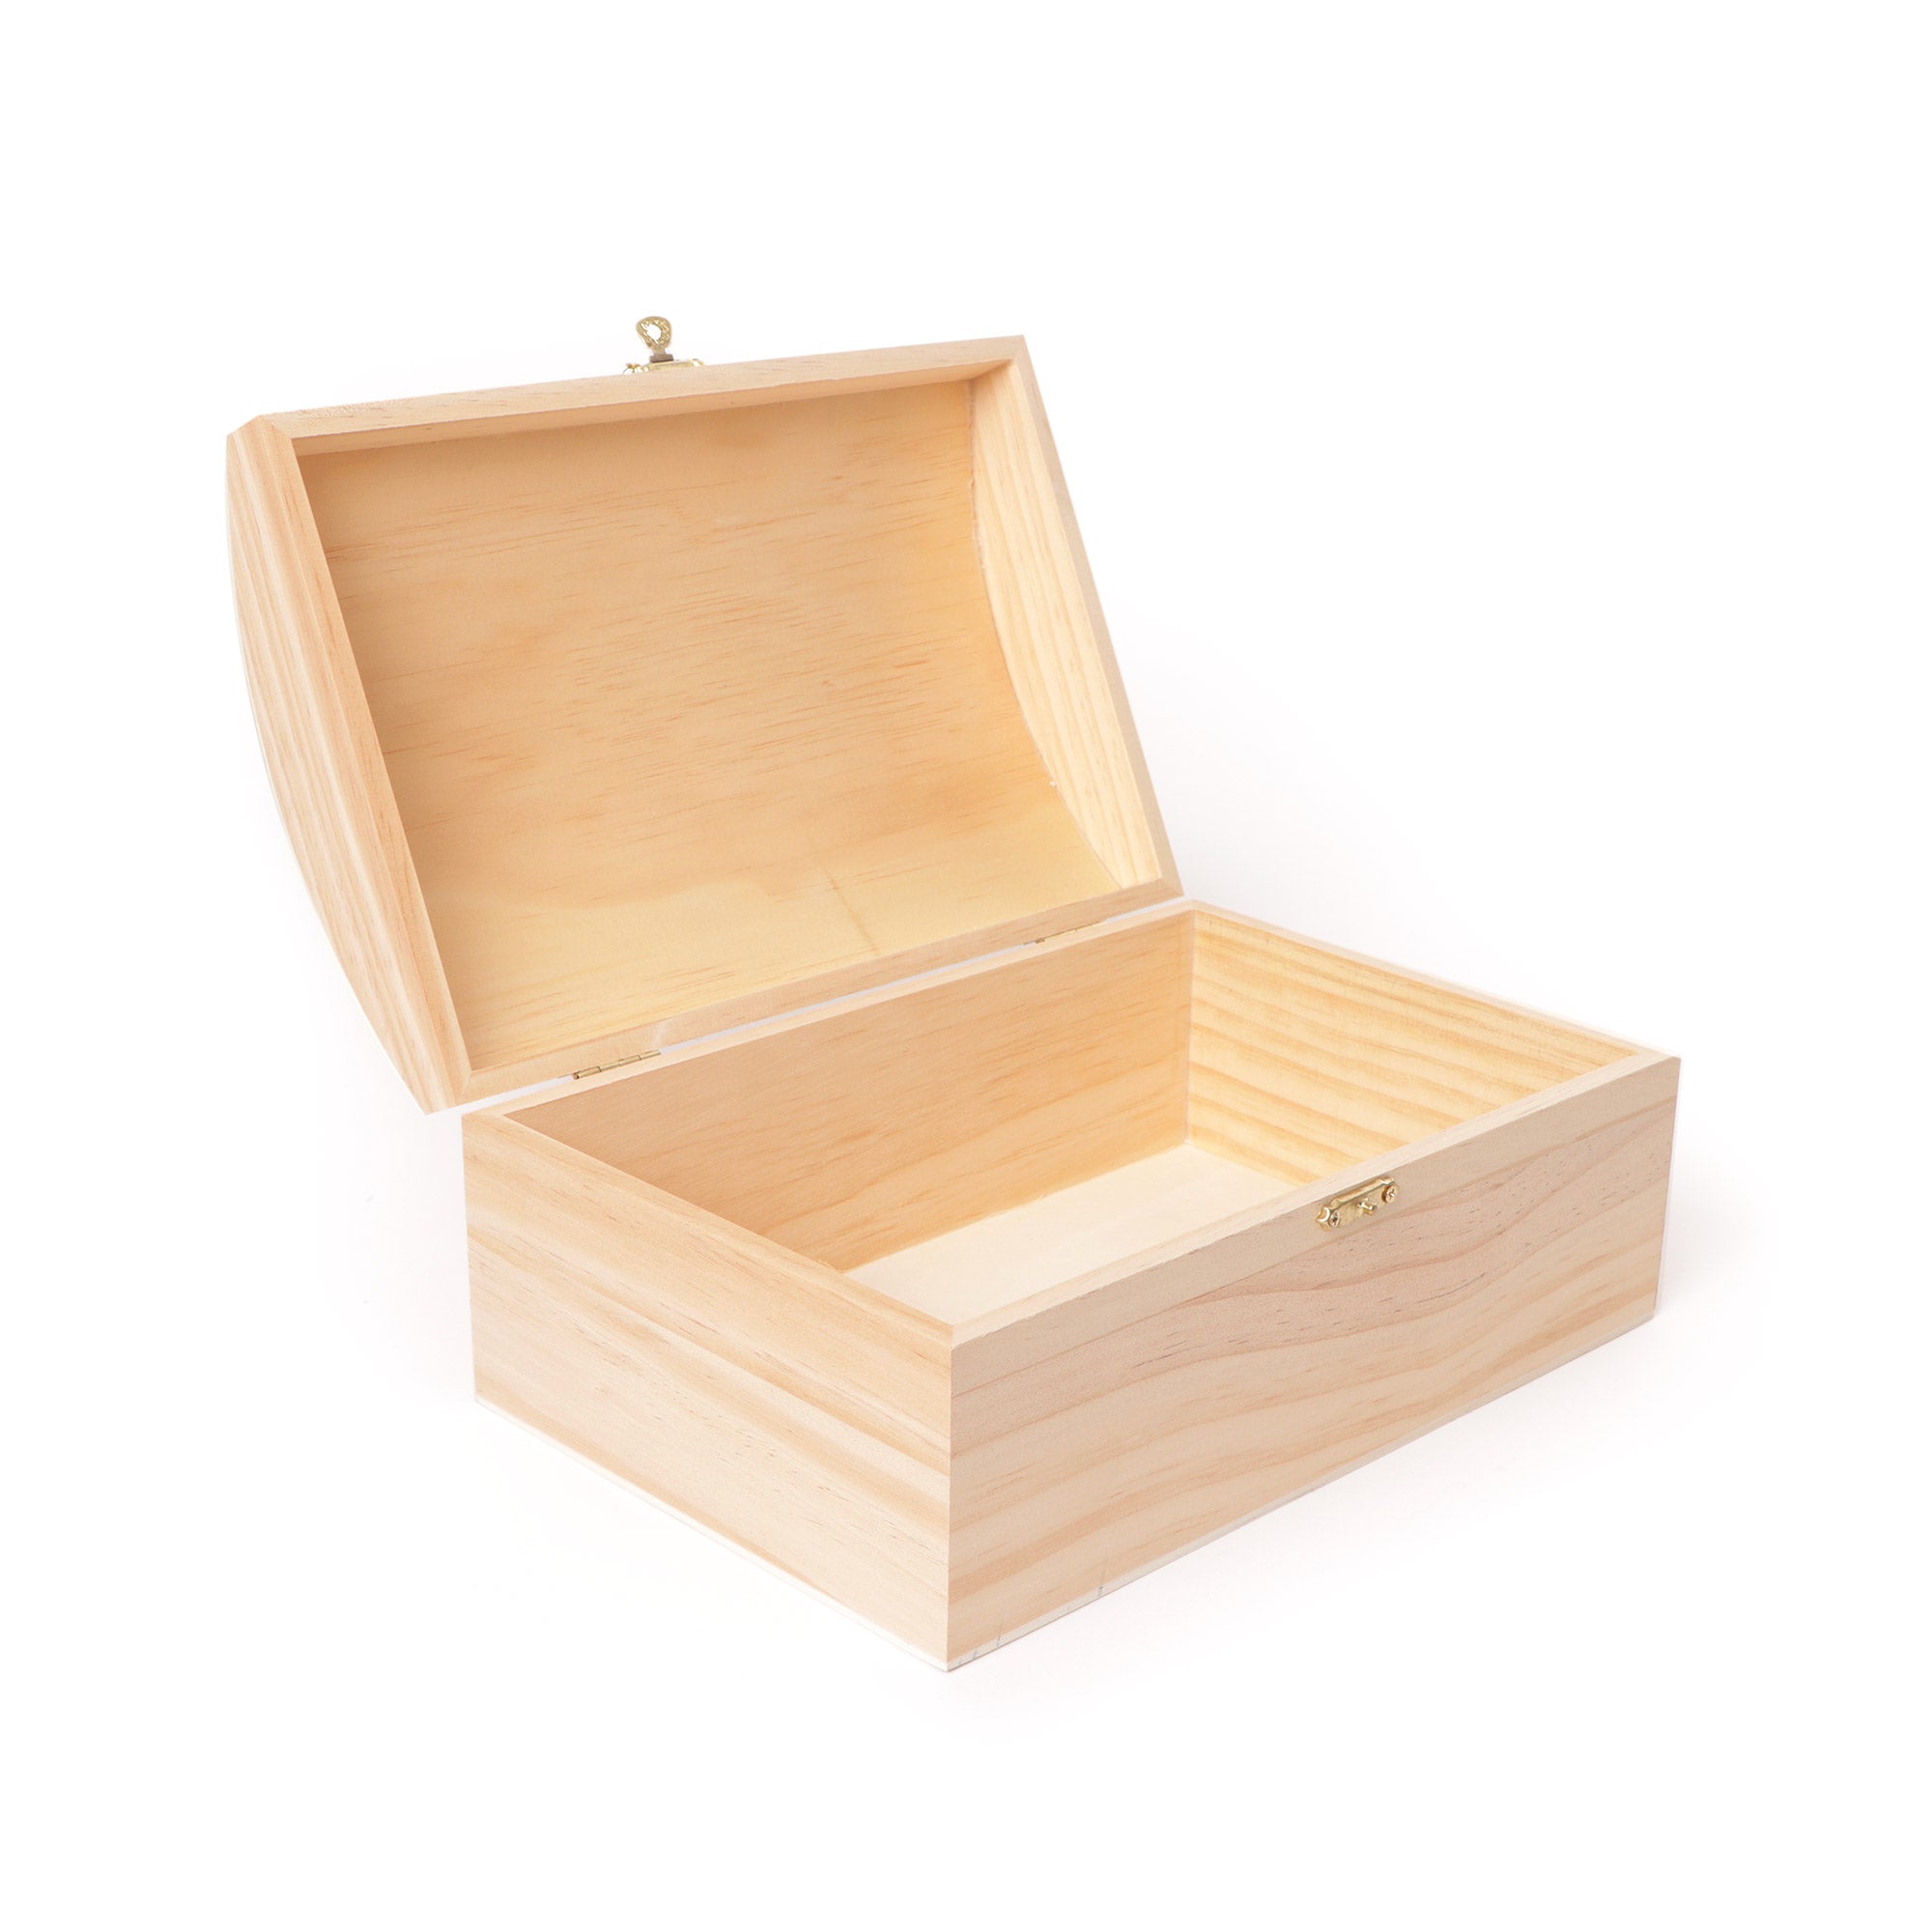 Deserres Import - Wooden Box - 24.5 x 16.5 x 11.5 cm - Objects to decorate - By DeSerres